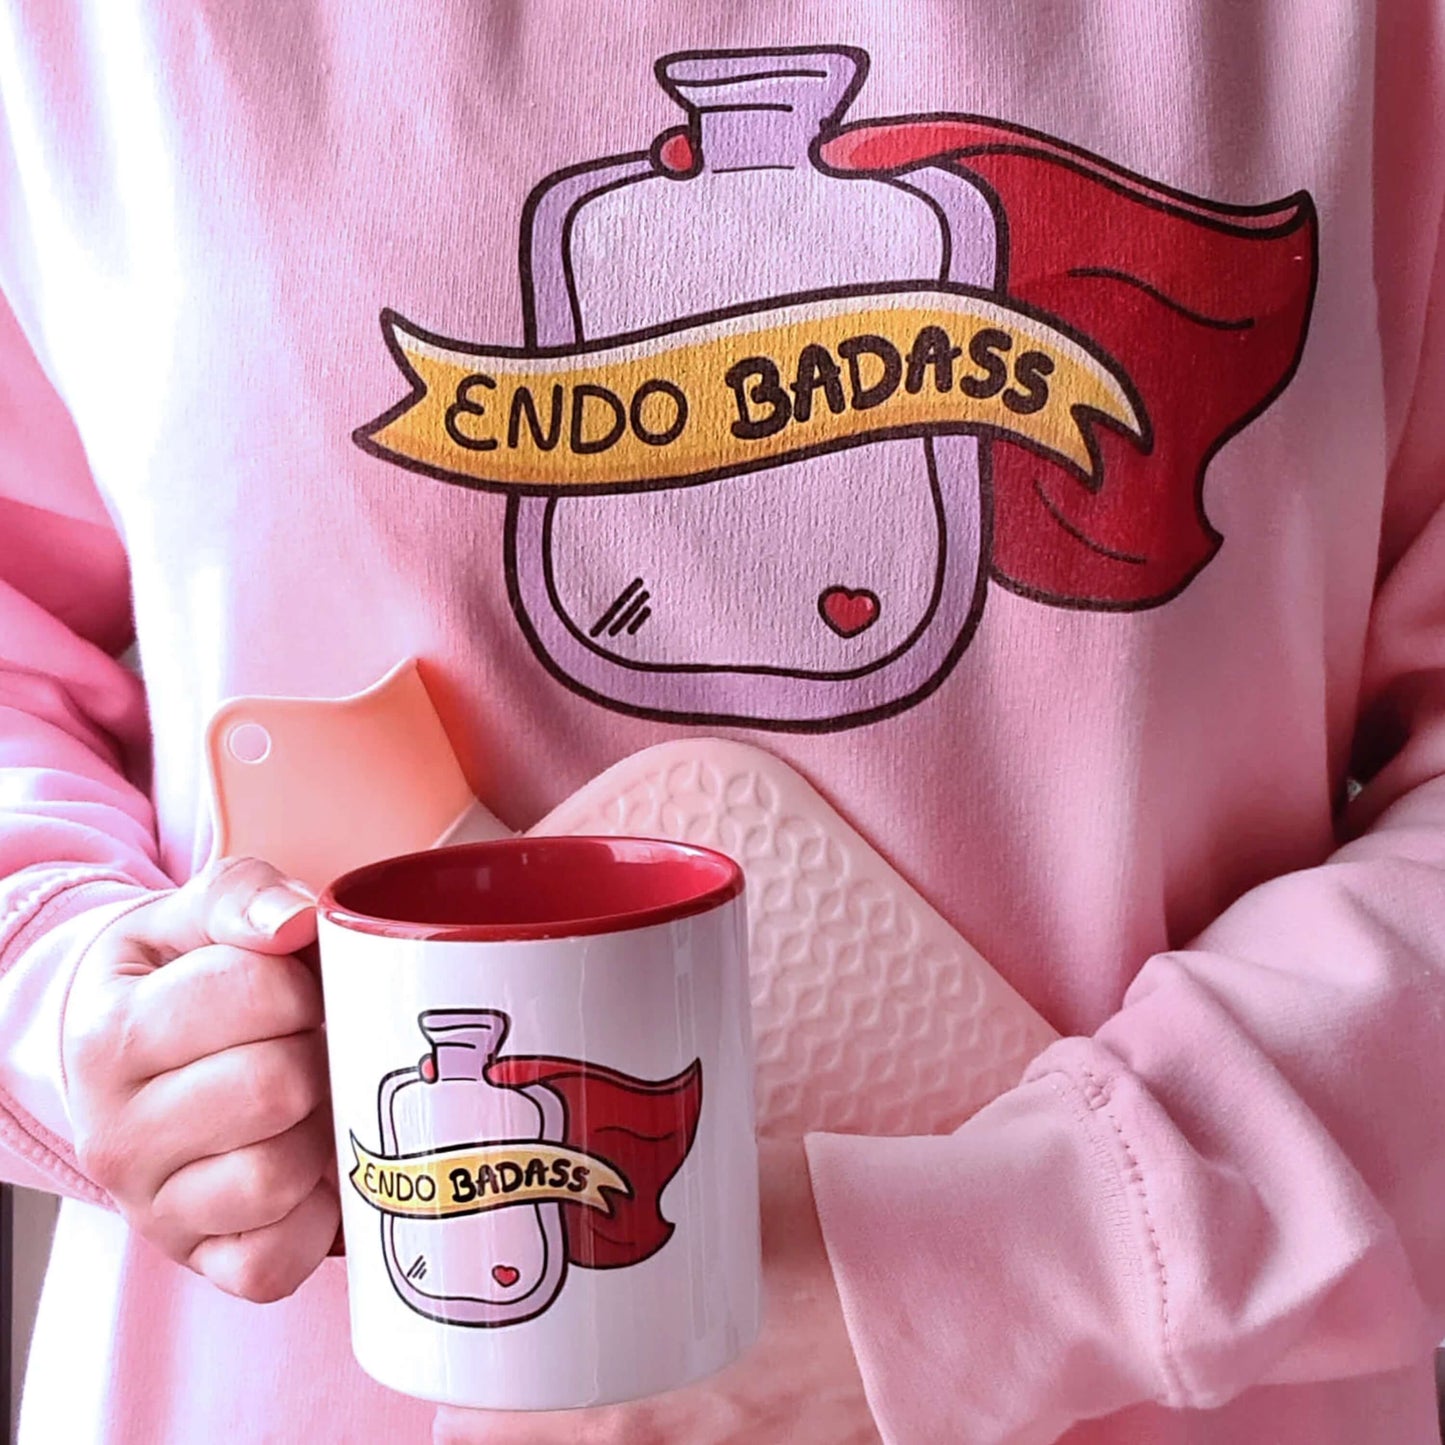 The Endo Badass Sweater - Endometriosis being modelled by Nikky clutching a pink hot waterbottle and matching innabox endometriosis mug. A pastel bubblegum baby pink sweatshirt jumper with a pink hot waterbottle with a small red heart, red cape and yellow banner reading 'endo badass' in black text. The hand drawn design is raising awareness for endometriosis and pelvic pain.